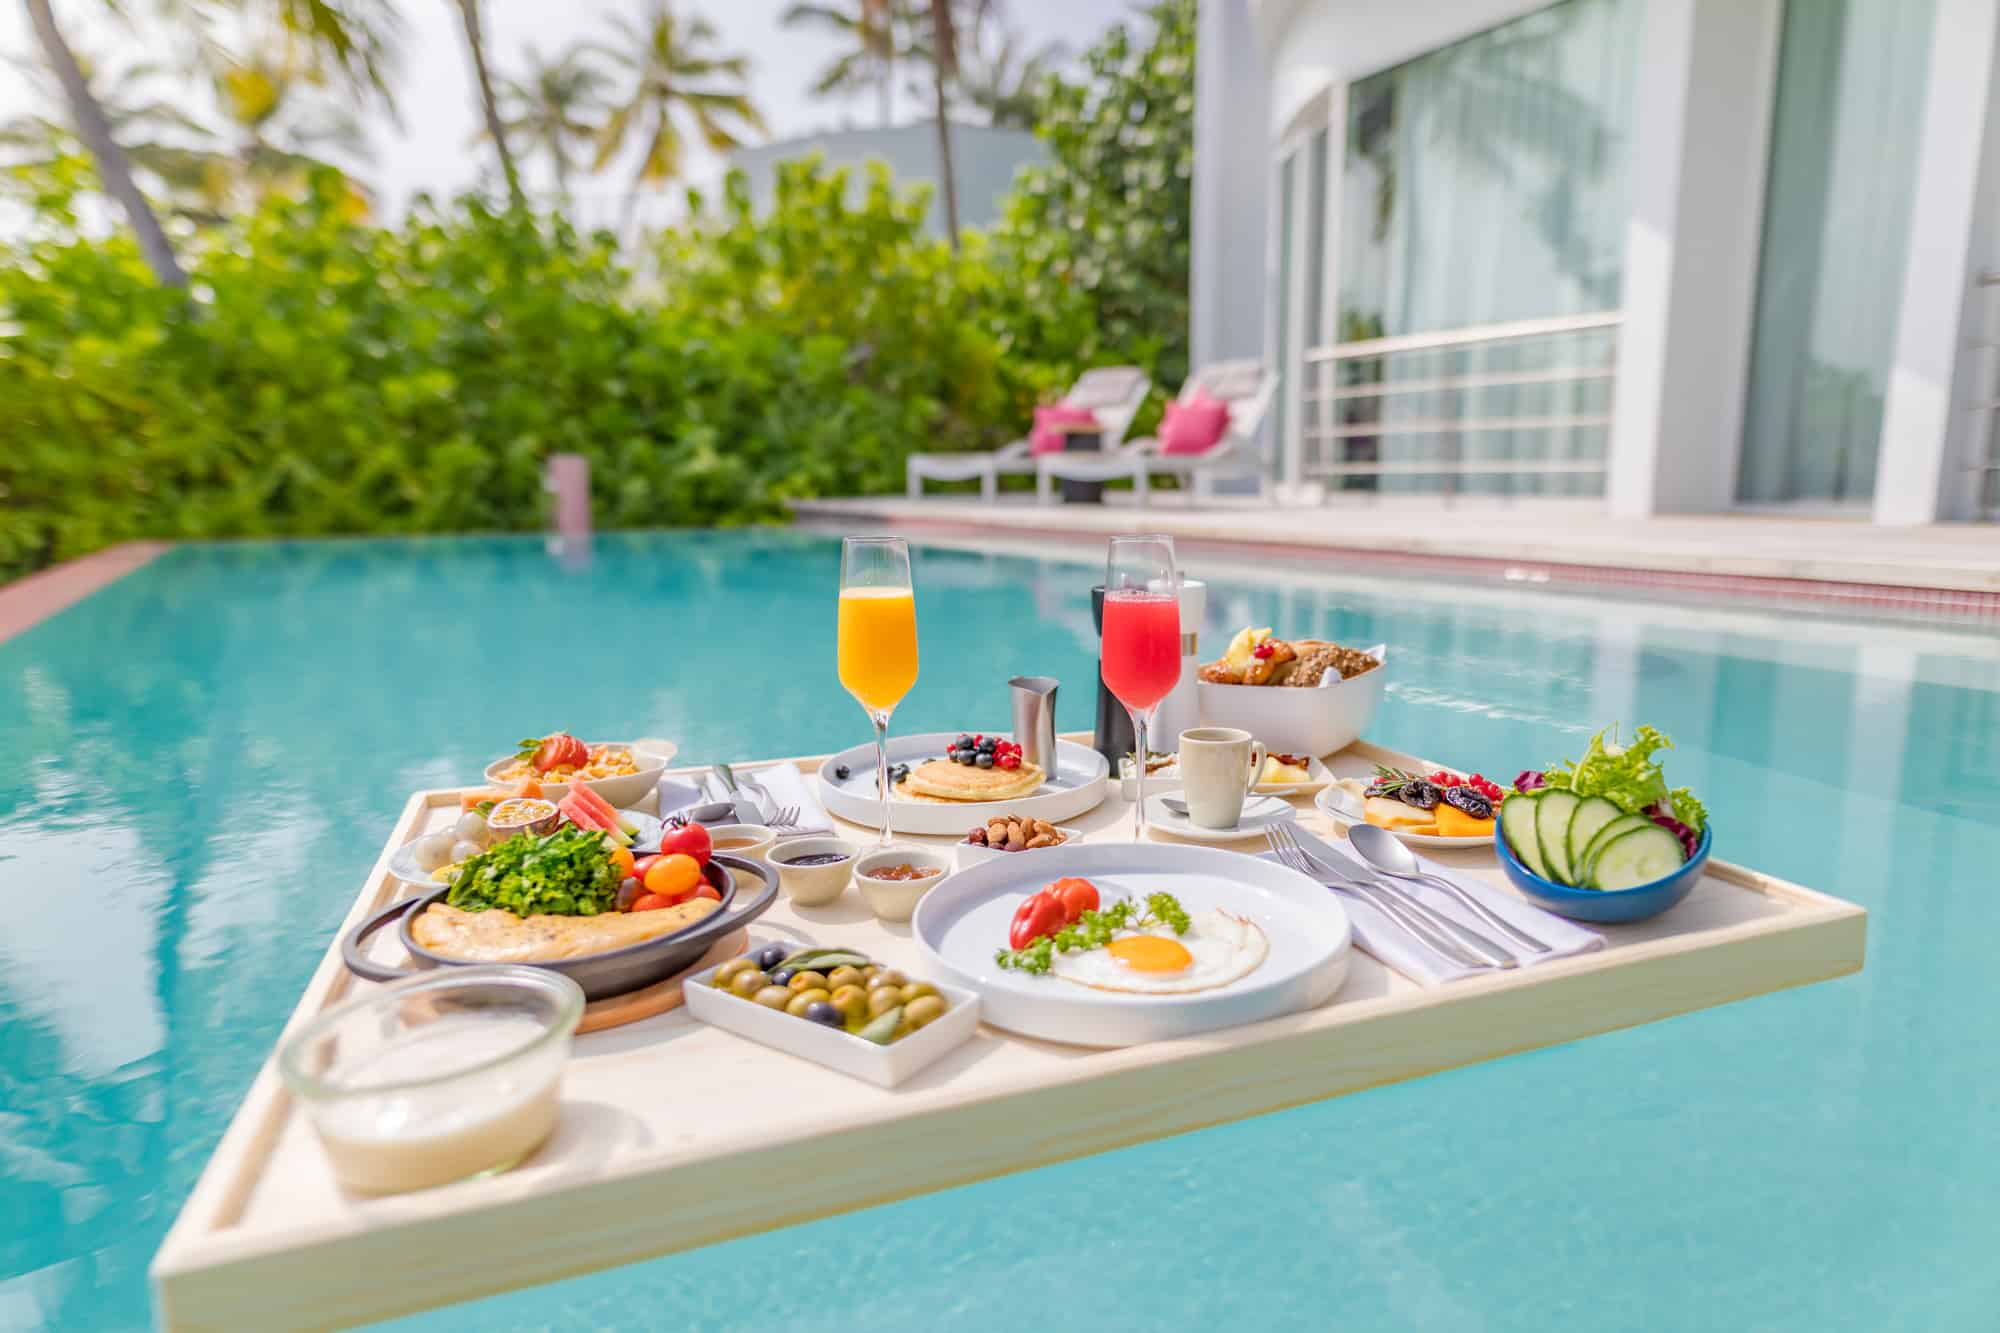 10 luxury hotels you can sample the Floating Breakfast around the world